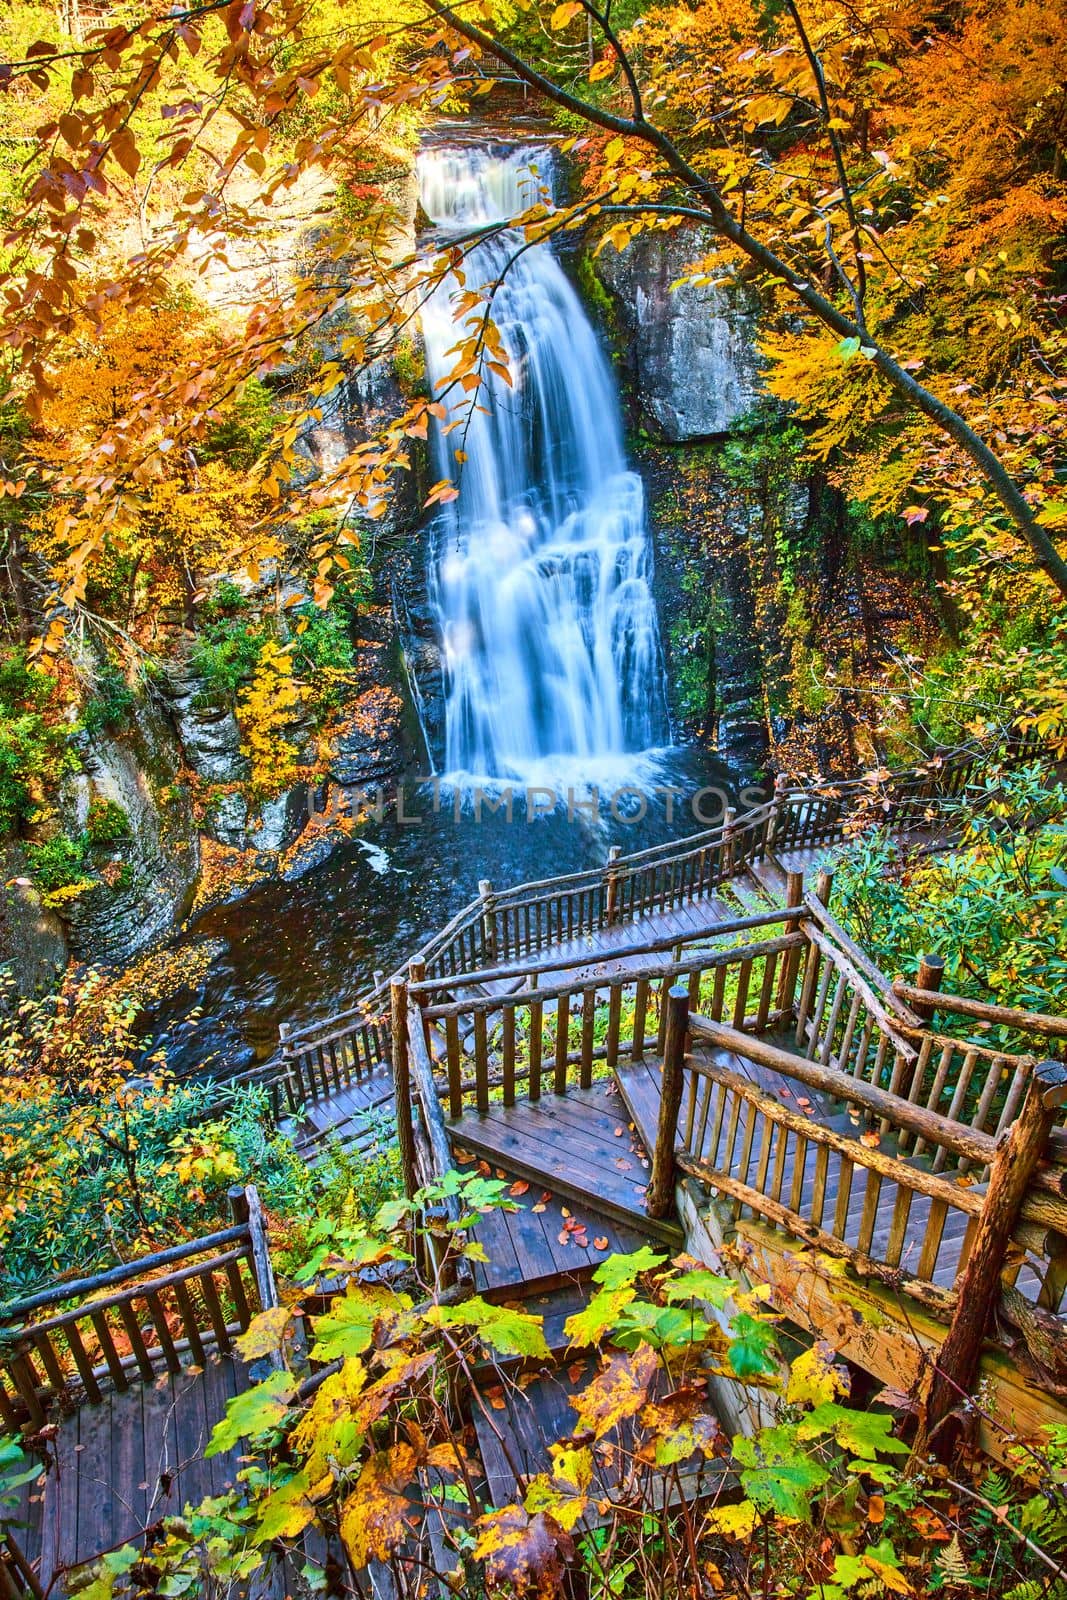 Image of Boardwalk stairs lead down to stunning large waterfall over cliffs surrounded by yellow fall foliage